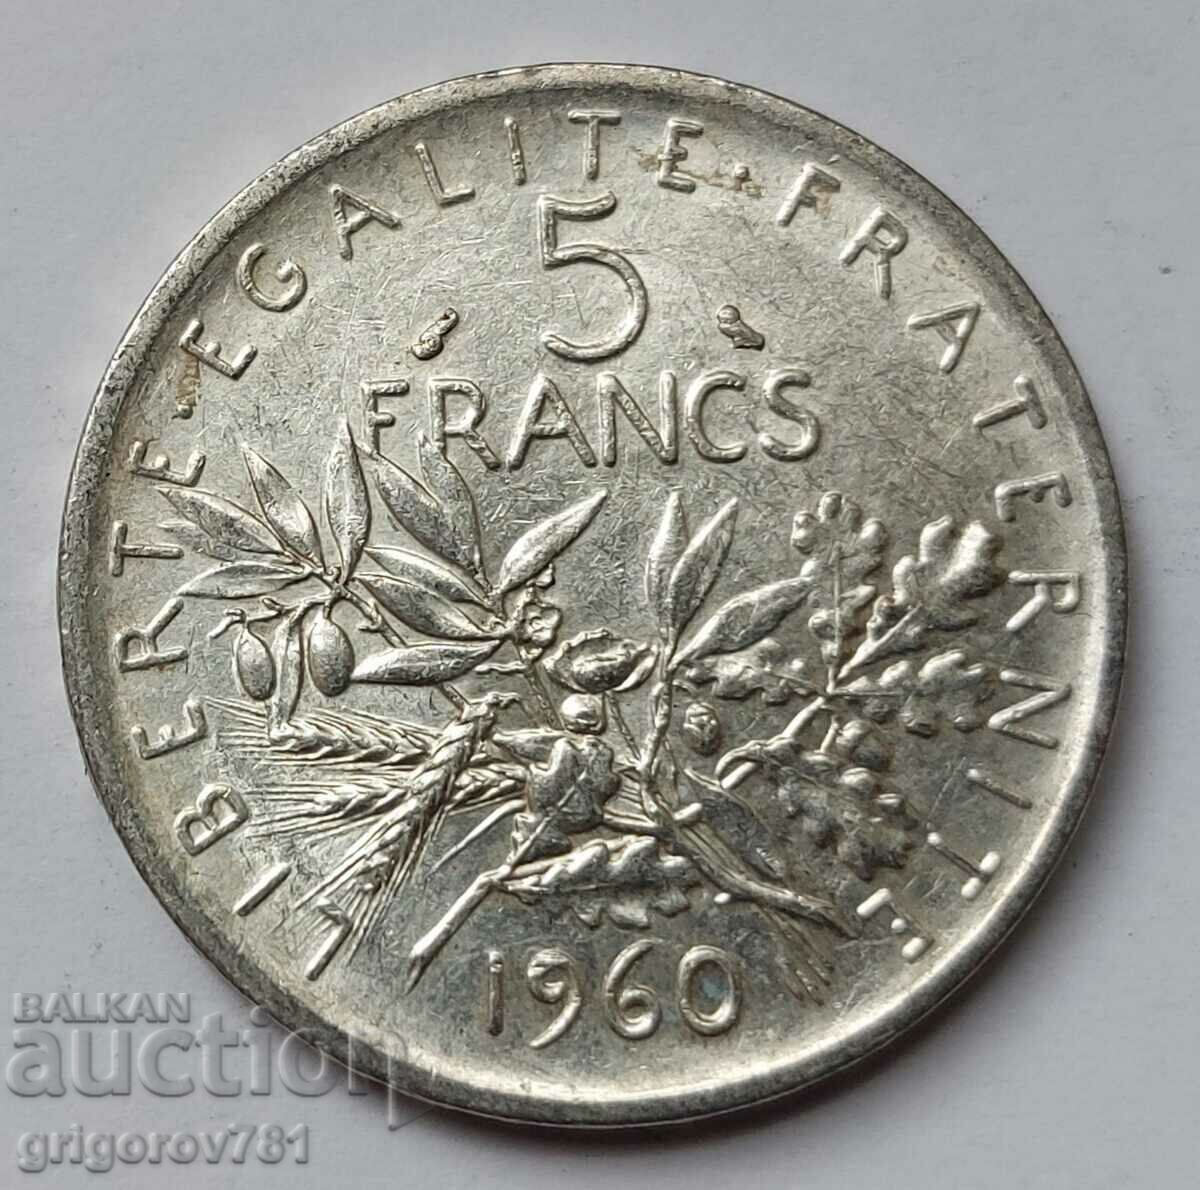 5 Francs Silver France 1960 - Silver Coin #9